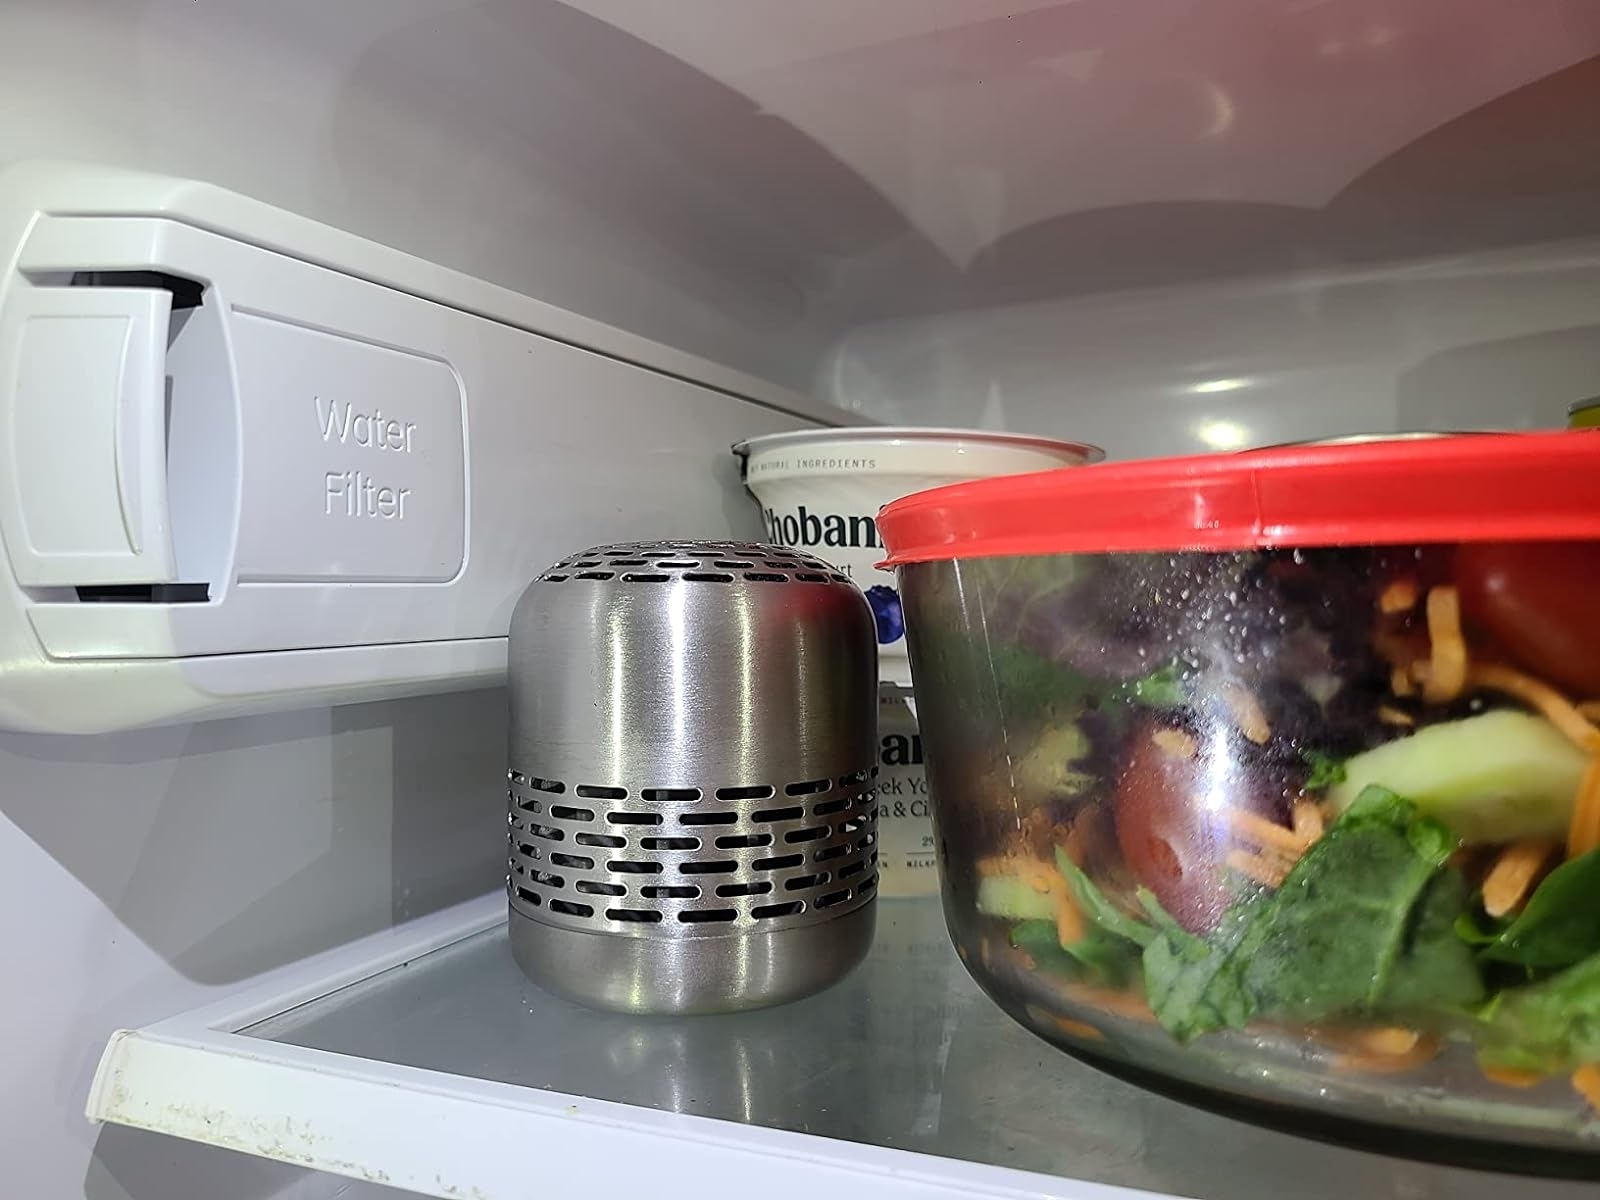 Stainless steel fridge deodorizer next to a salad in a clear bowl with a red lid inside a refrigerator